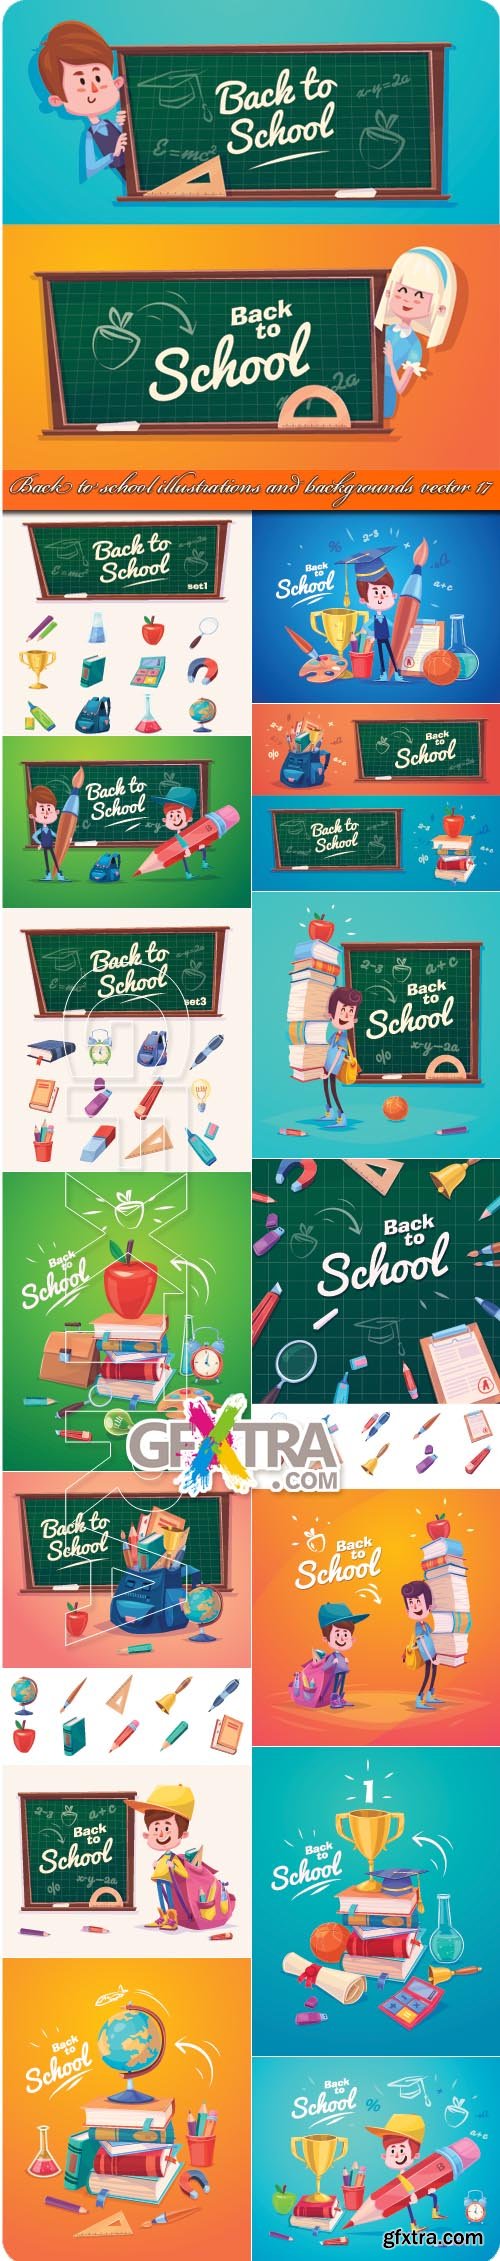 Back to school illustrations and backgrounds vector 17